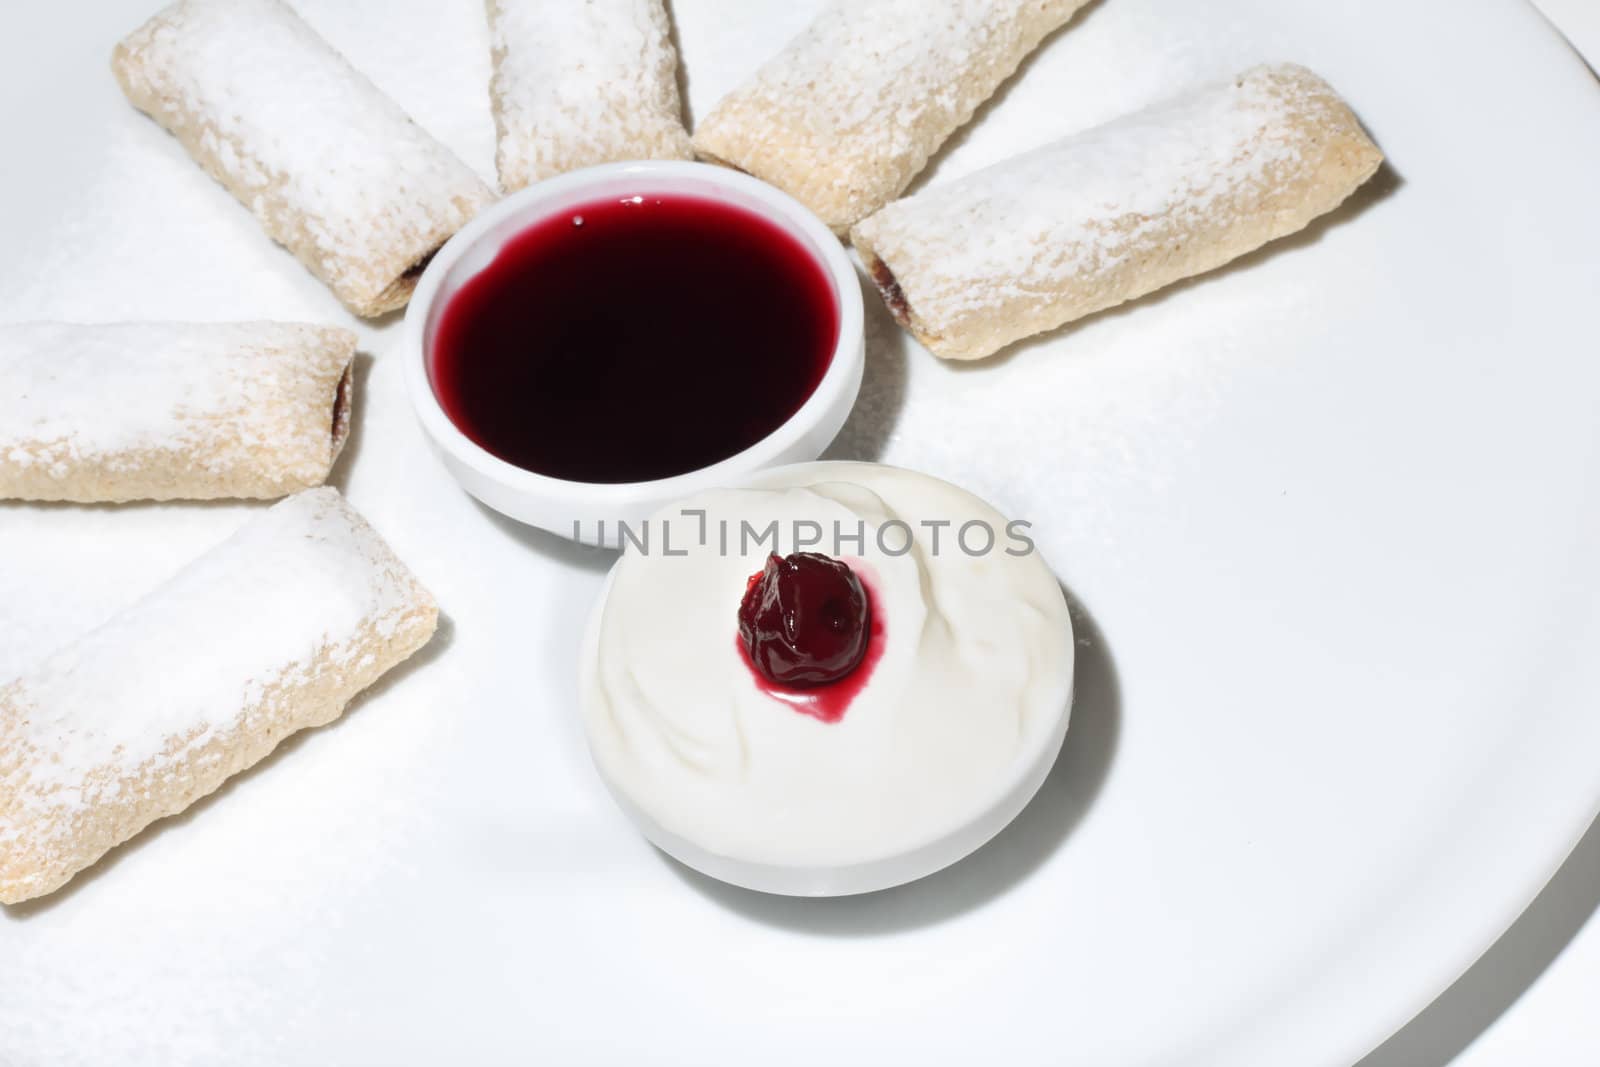 Dipping dessert with powdered sugar by Dven